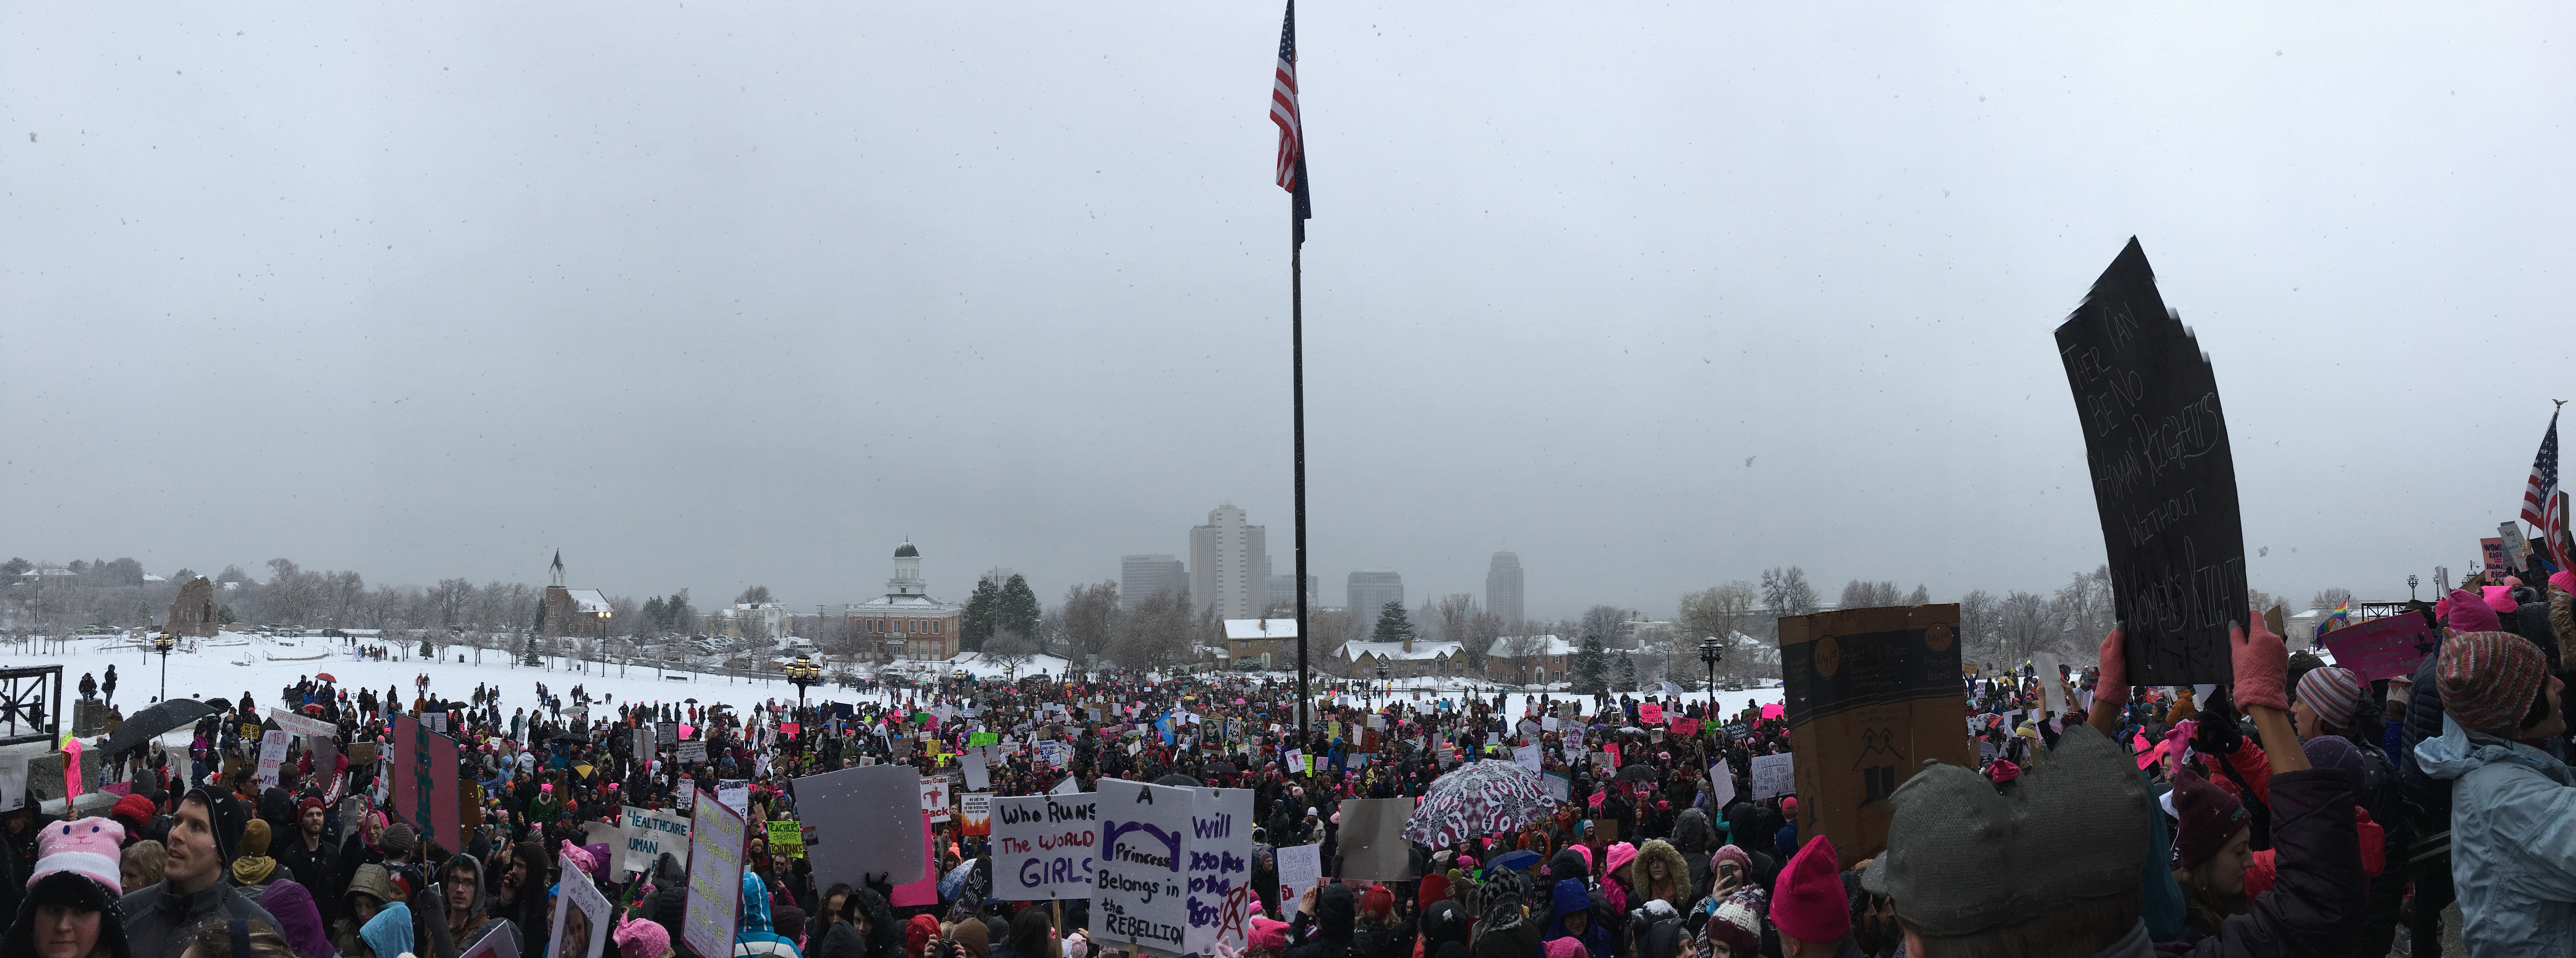 Thousand of people march up to the Utah State Capitol to promote women's rights. (Sarah Christensen)